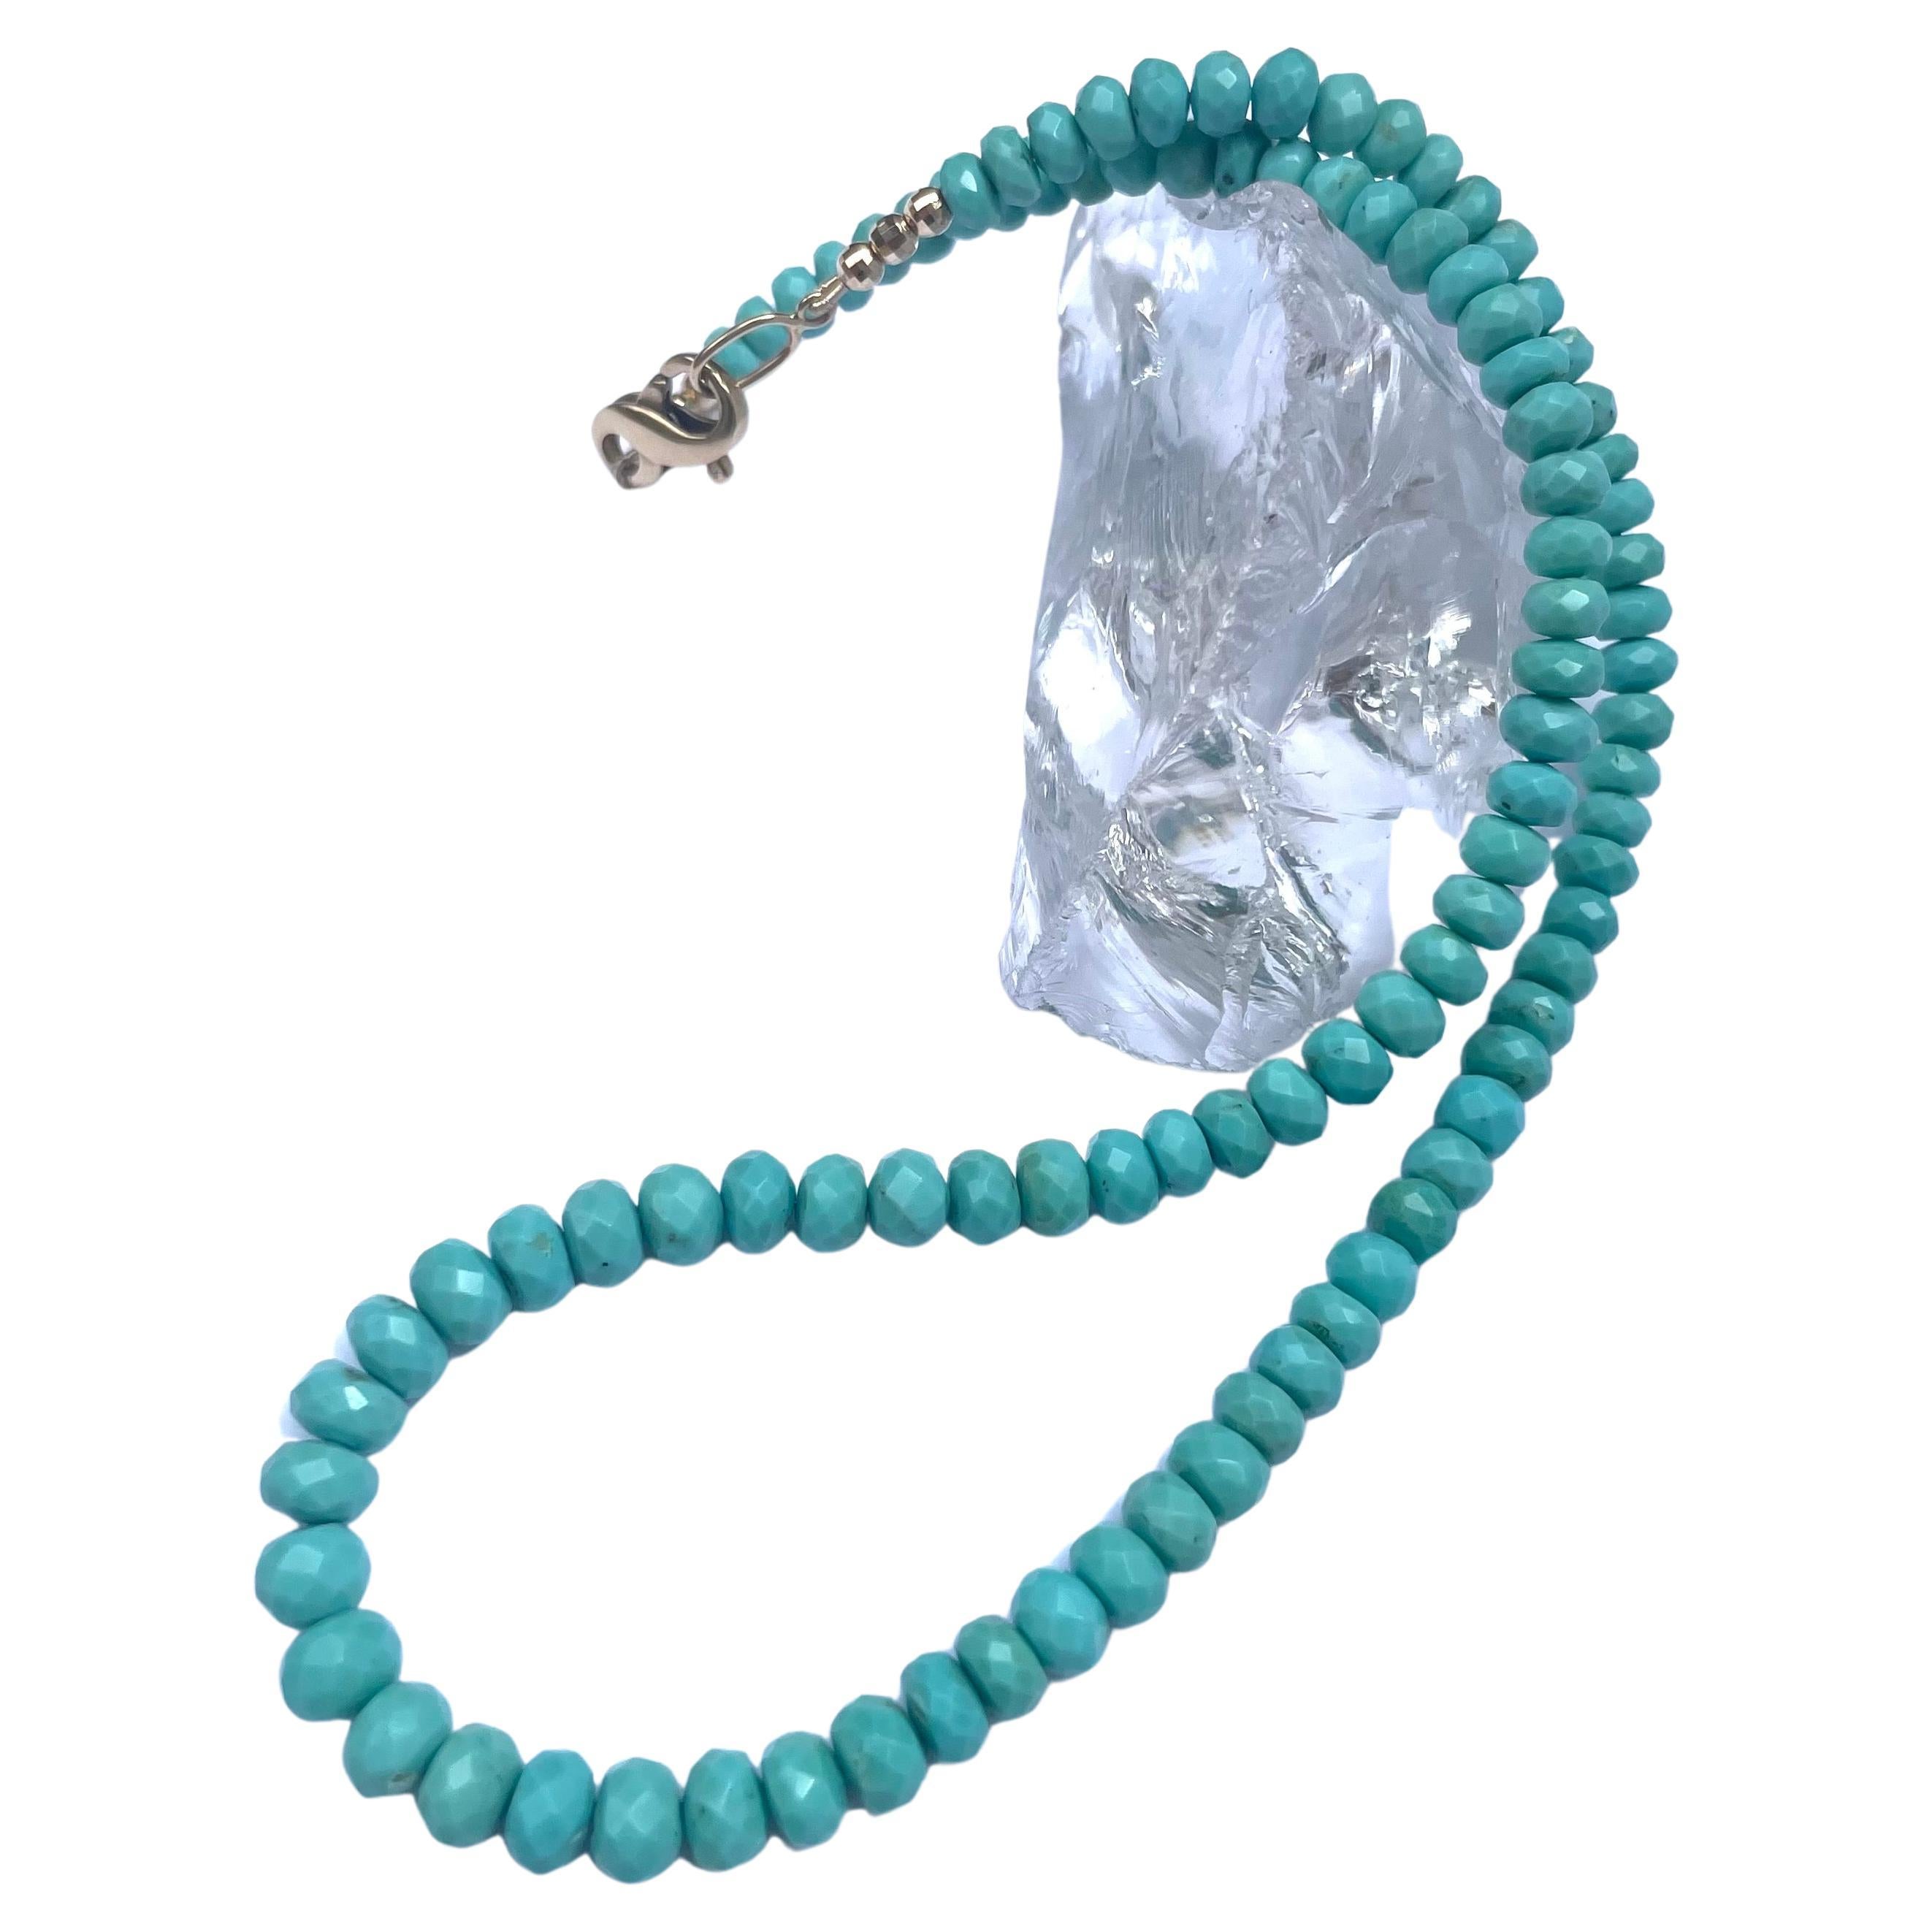 Bead Sleeping Beauty Turquoise Necklace For Sale